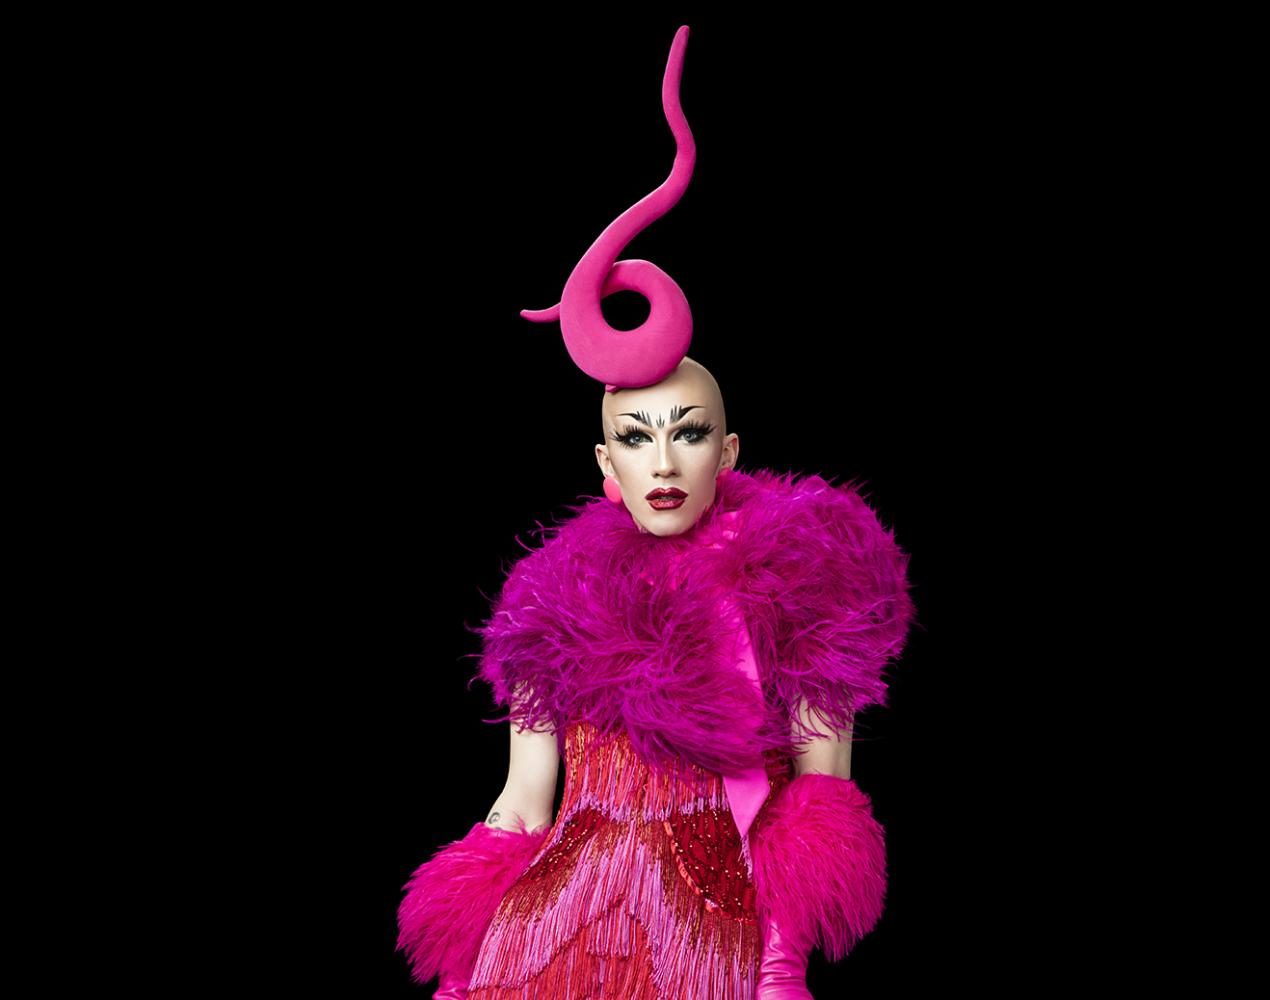 Drag queen Sasha Velour comes back to her roots with visionary performance